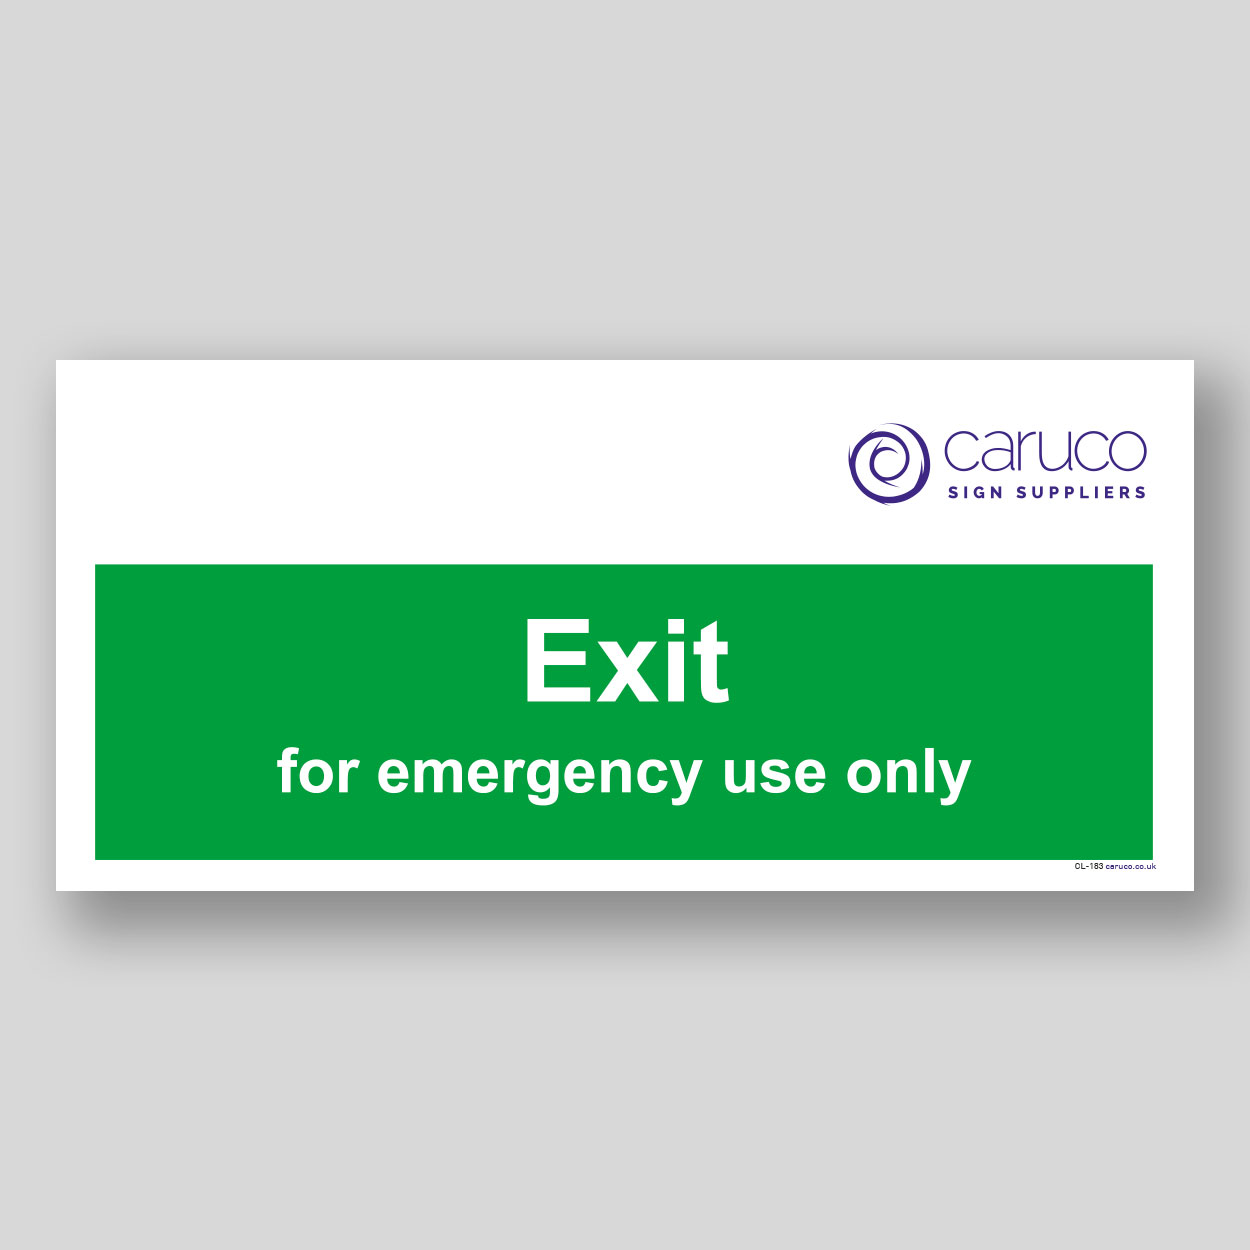 CL-183 Exit - for emergency use only